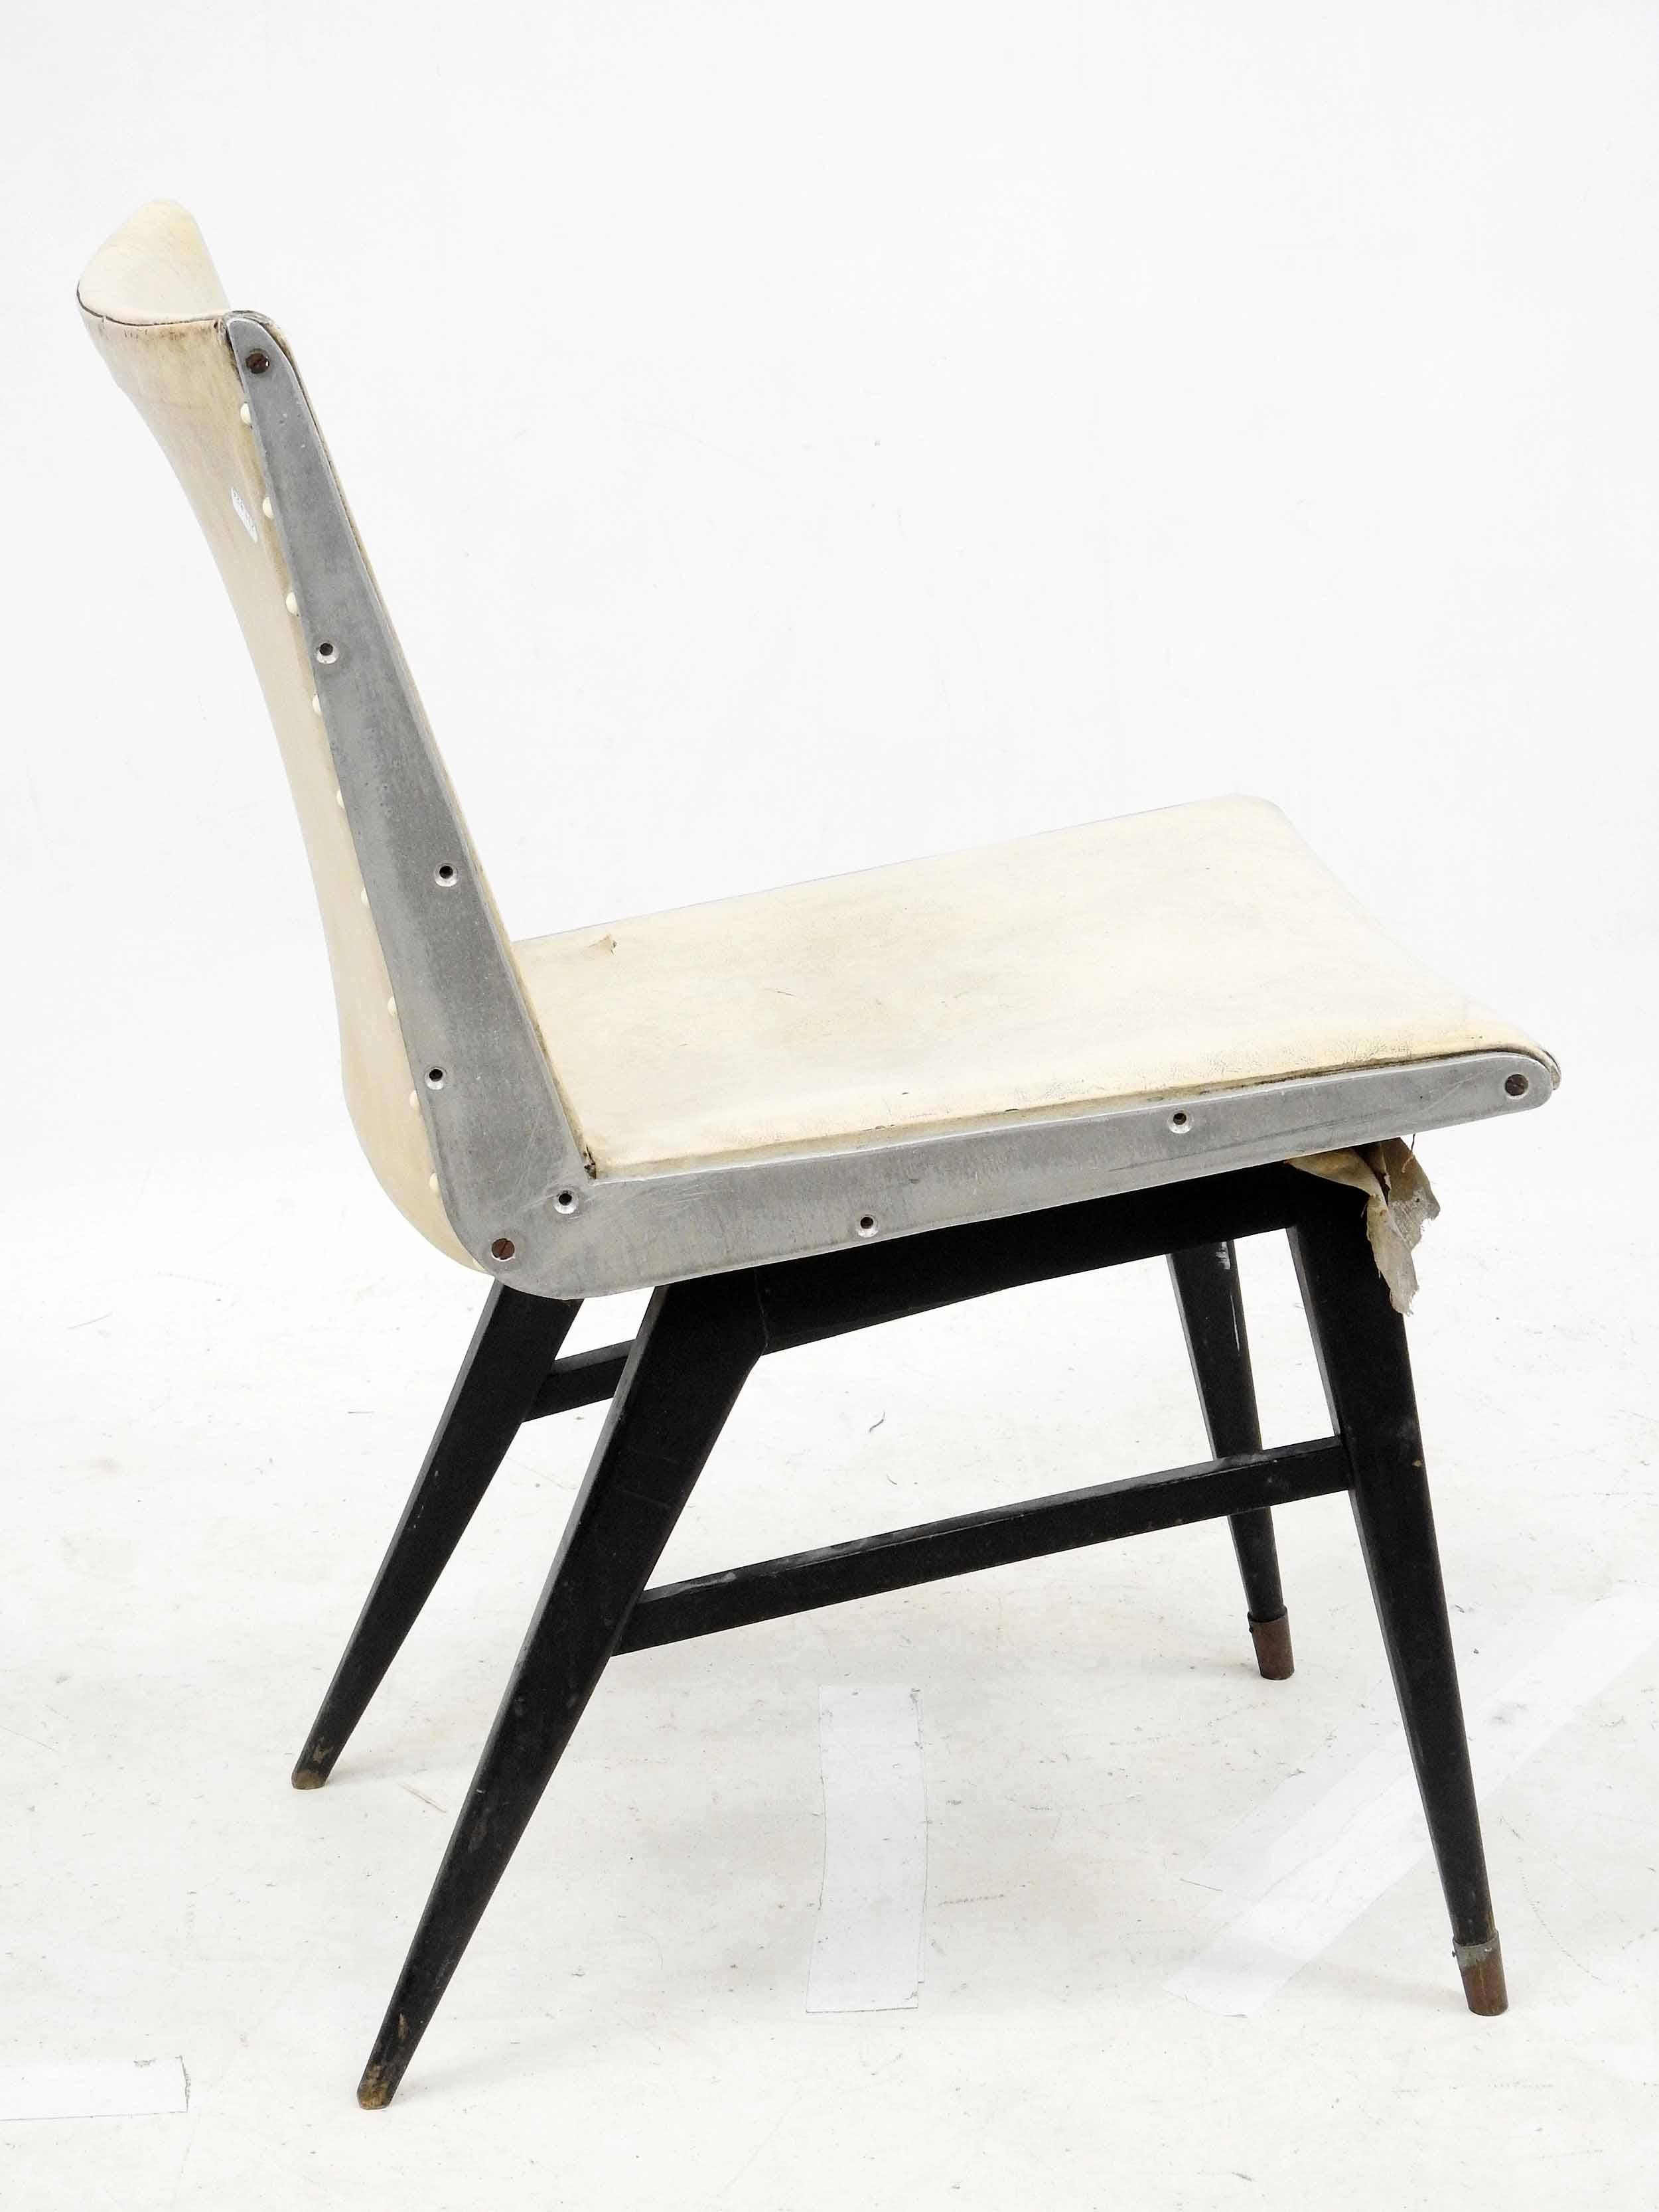 Blackened wood and aluminum chair in the style of Jens Risom. 
Probable prototype from the 1950s-1960s.
 